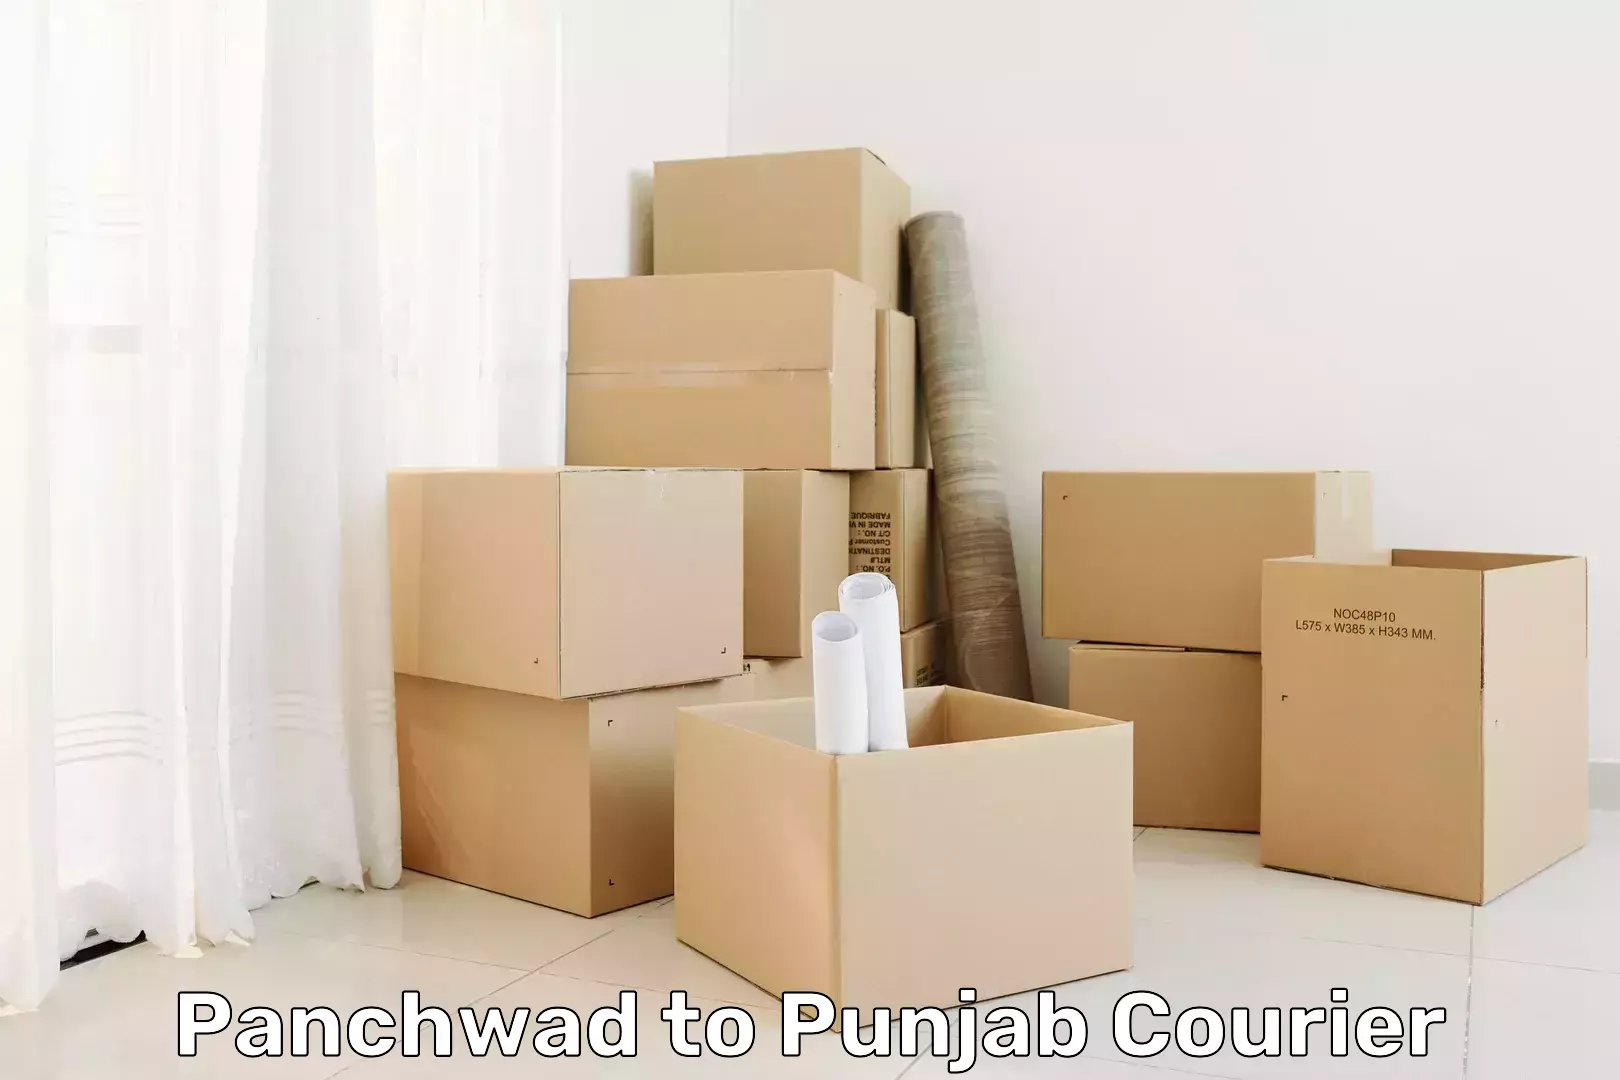 24/7 courier service Panchwad to Central University of Punjab Bathinda